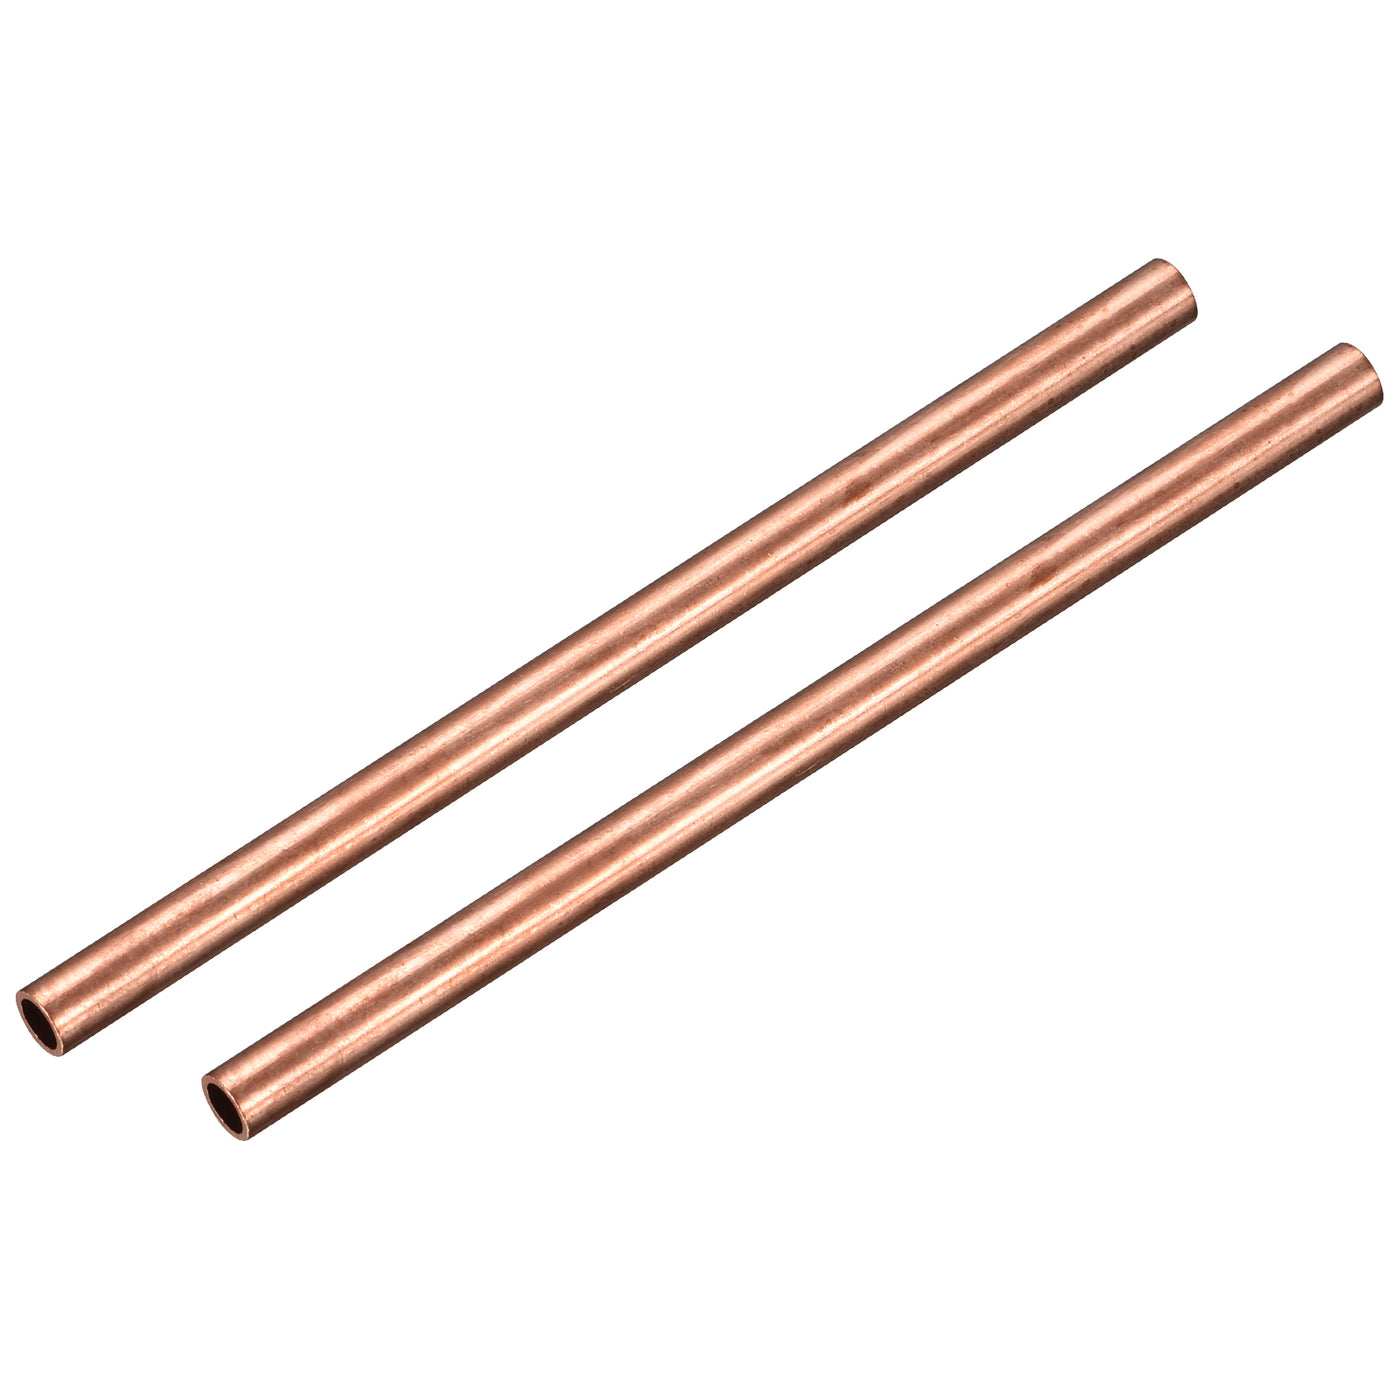 Brass Round Tube 9mm OD 1mm Wall Thickness 100mm Length Pipe Tubing 2 Pcs